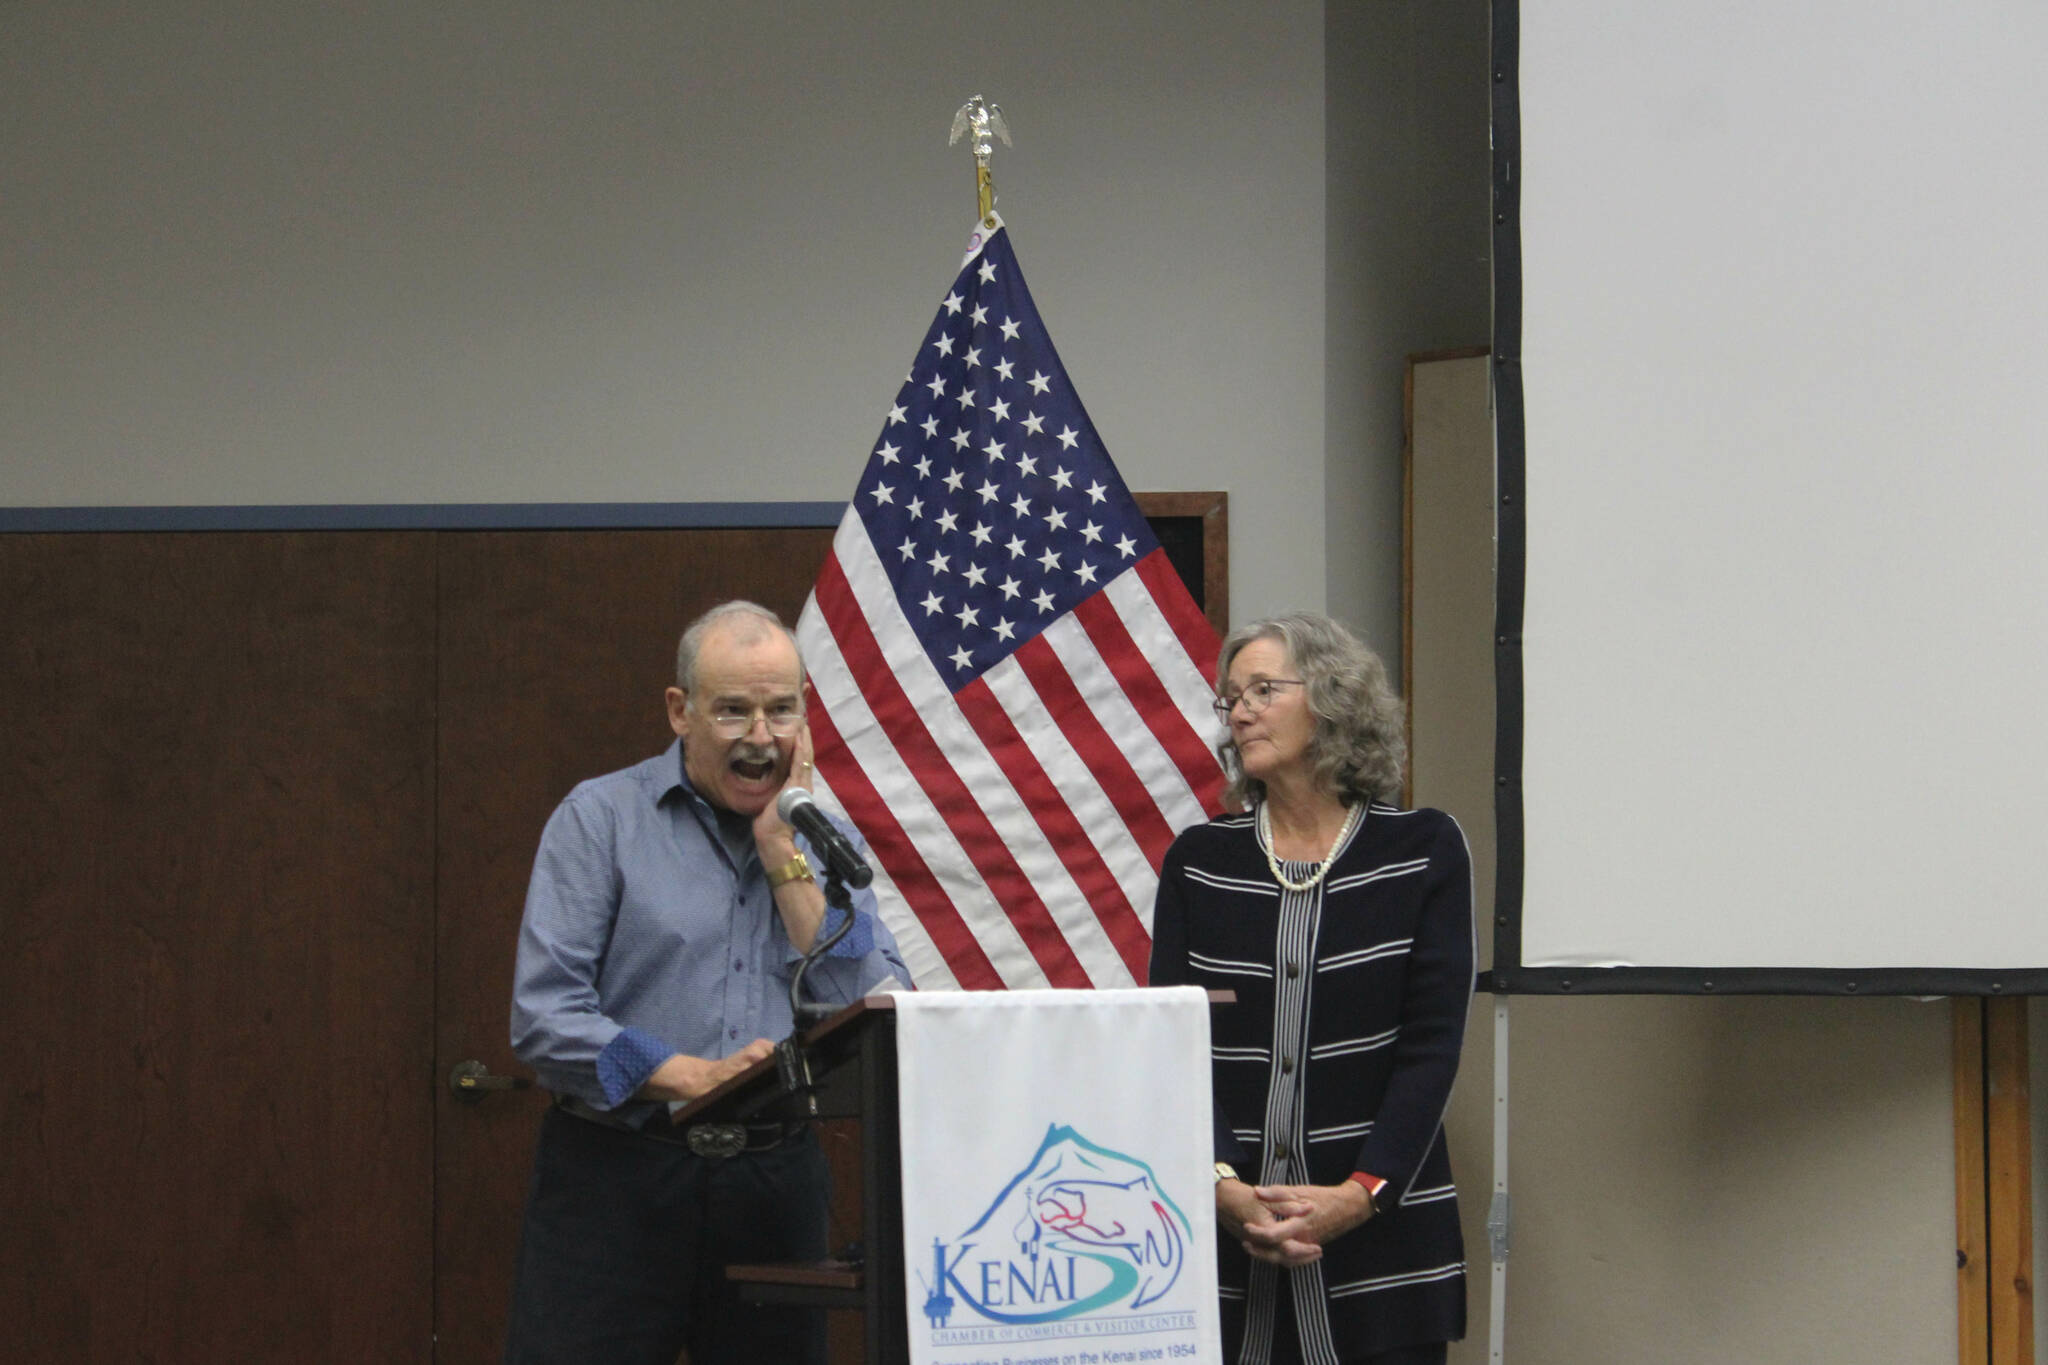 Bob Bird, left, and Lisa Parker participate in a Constitutional Convention Forum at the Kenai Chamber of Commerce and Visitor Center on Wednesday, Oct. 12, 2022 in Kenai, Alaska. (Ashlyn O’Hara/Peninsula Clarion)